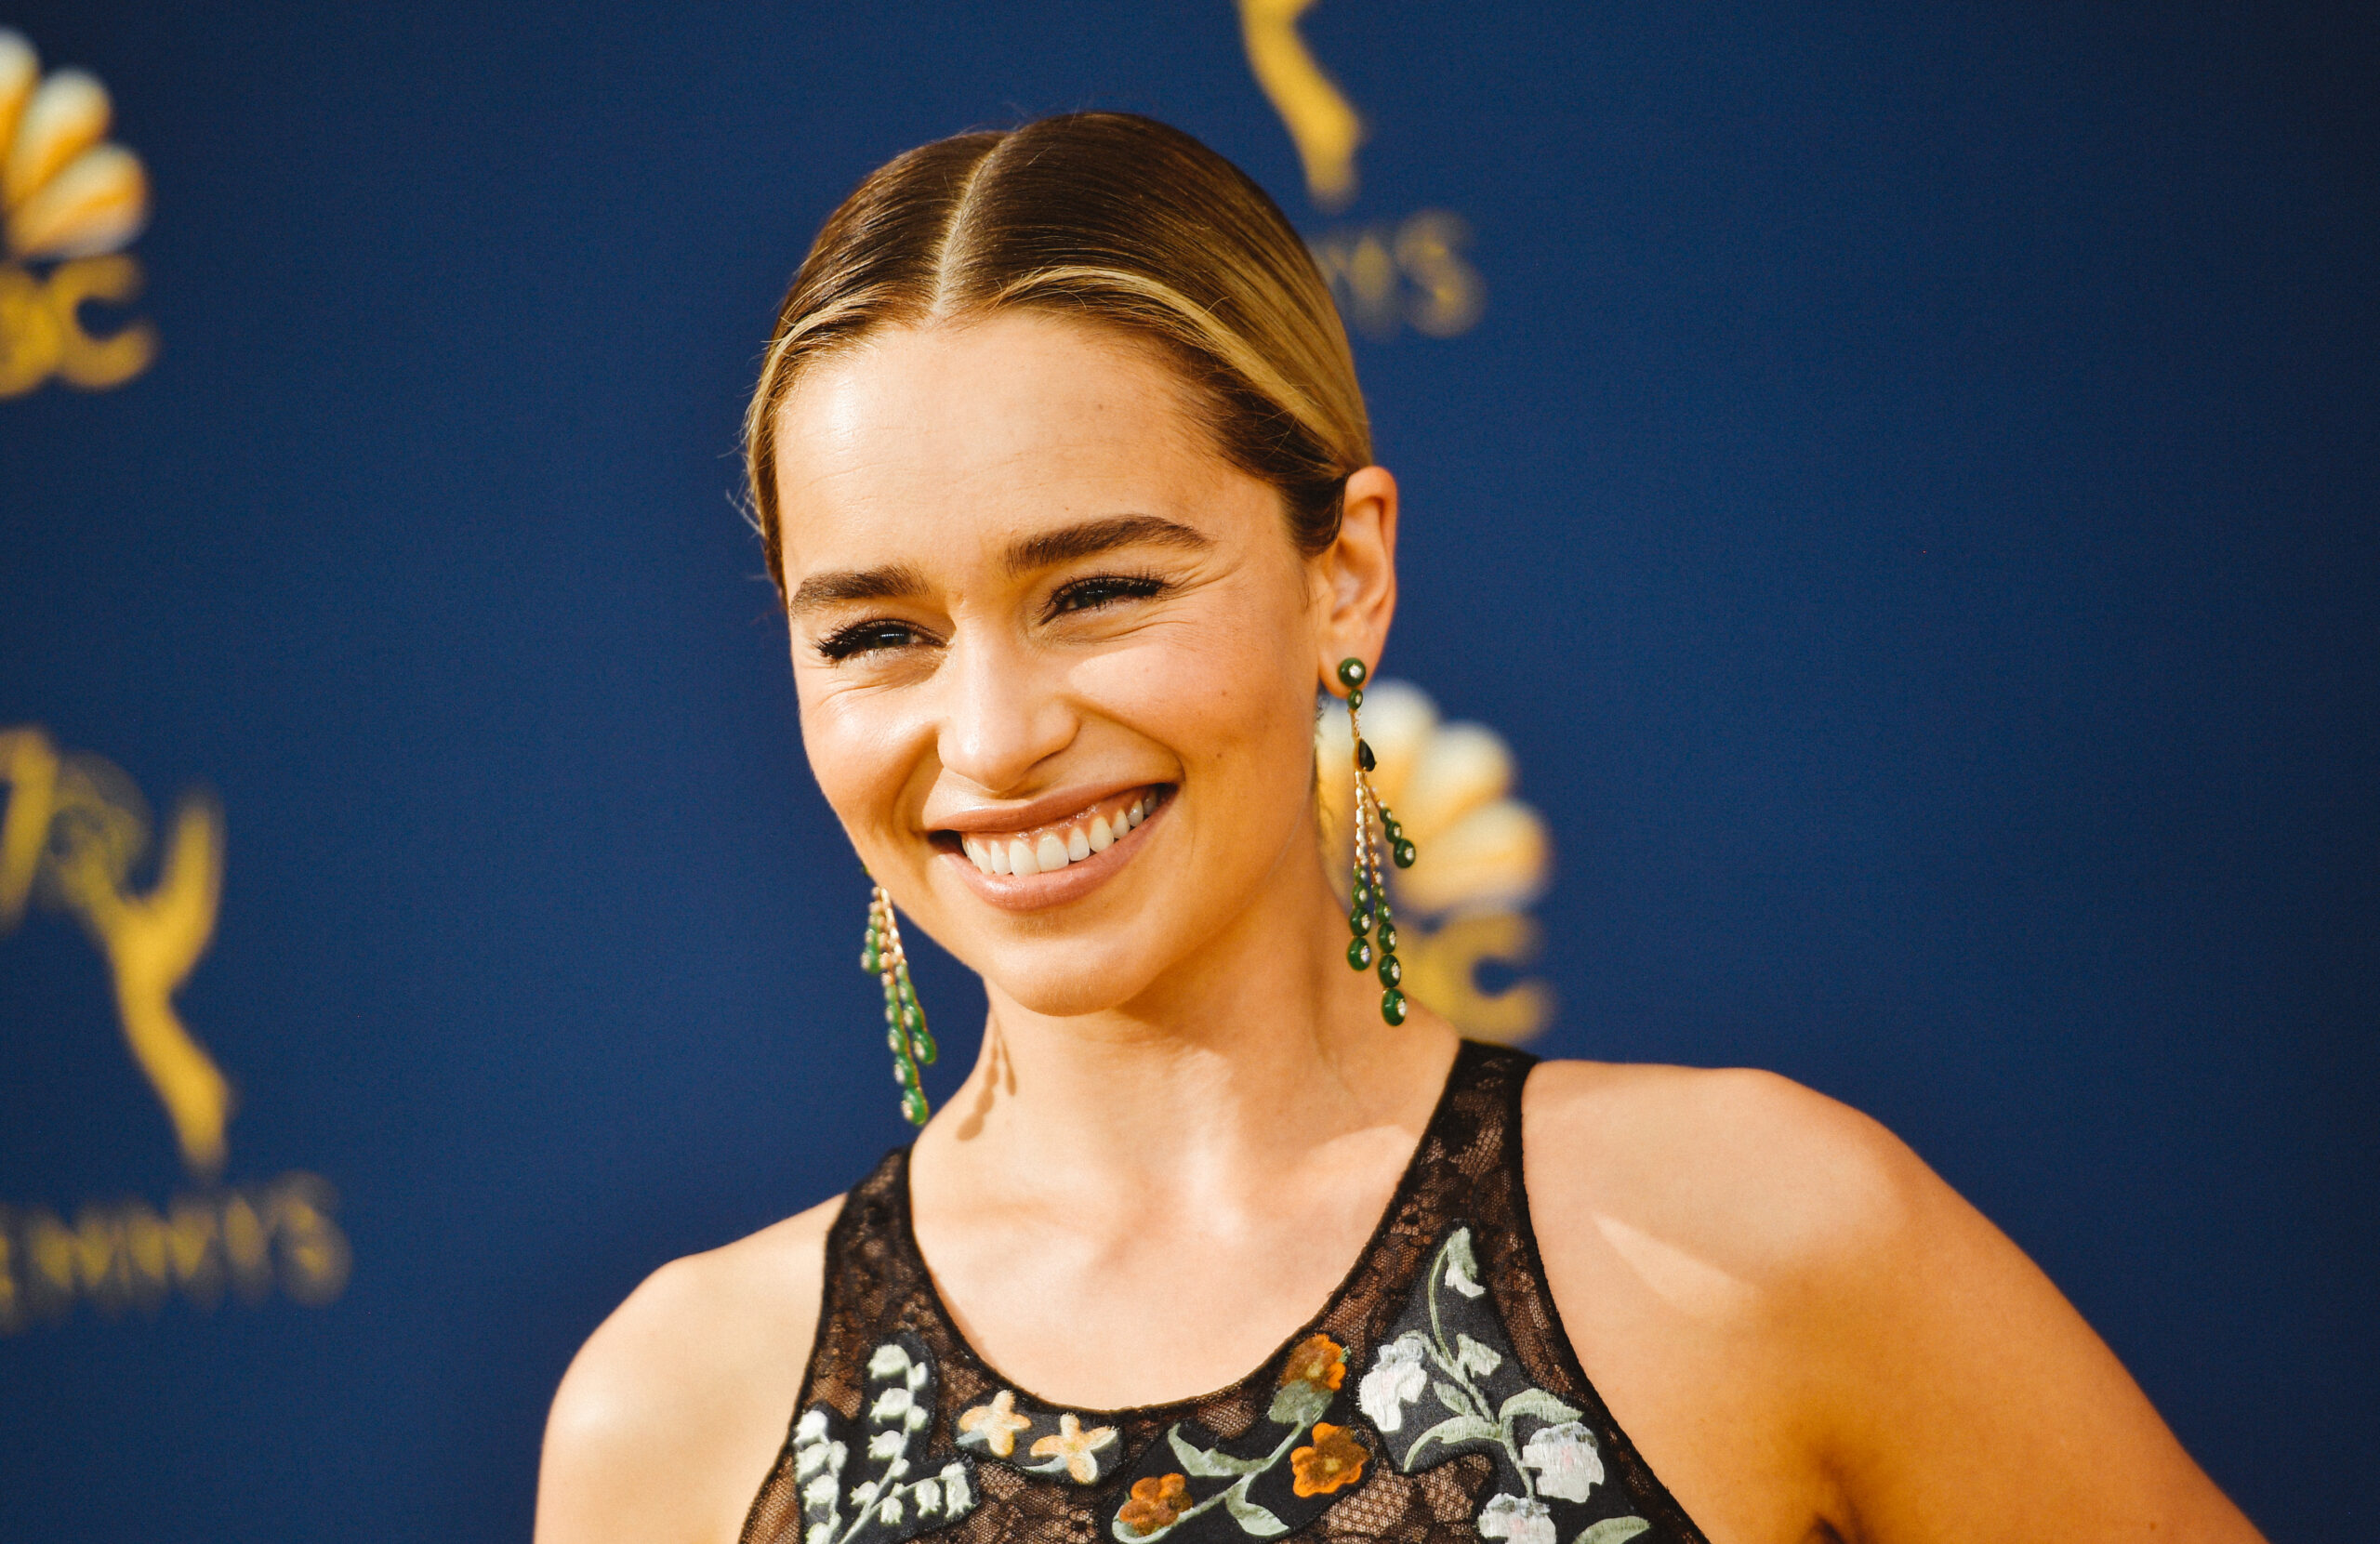 Game of Thrones’ actress feared being fired, dying on live TV after brain injury